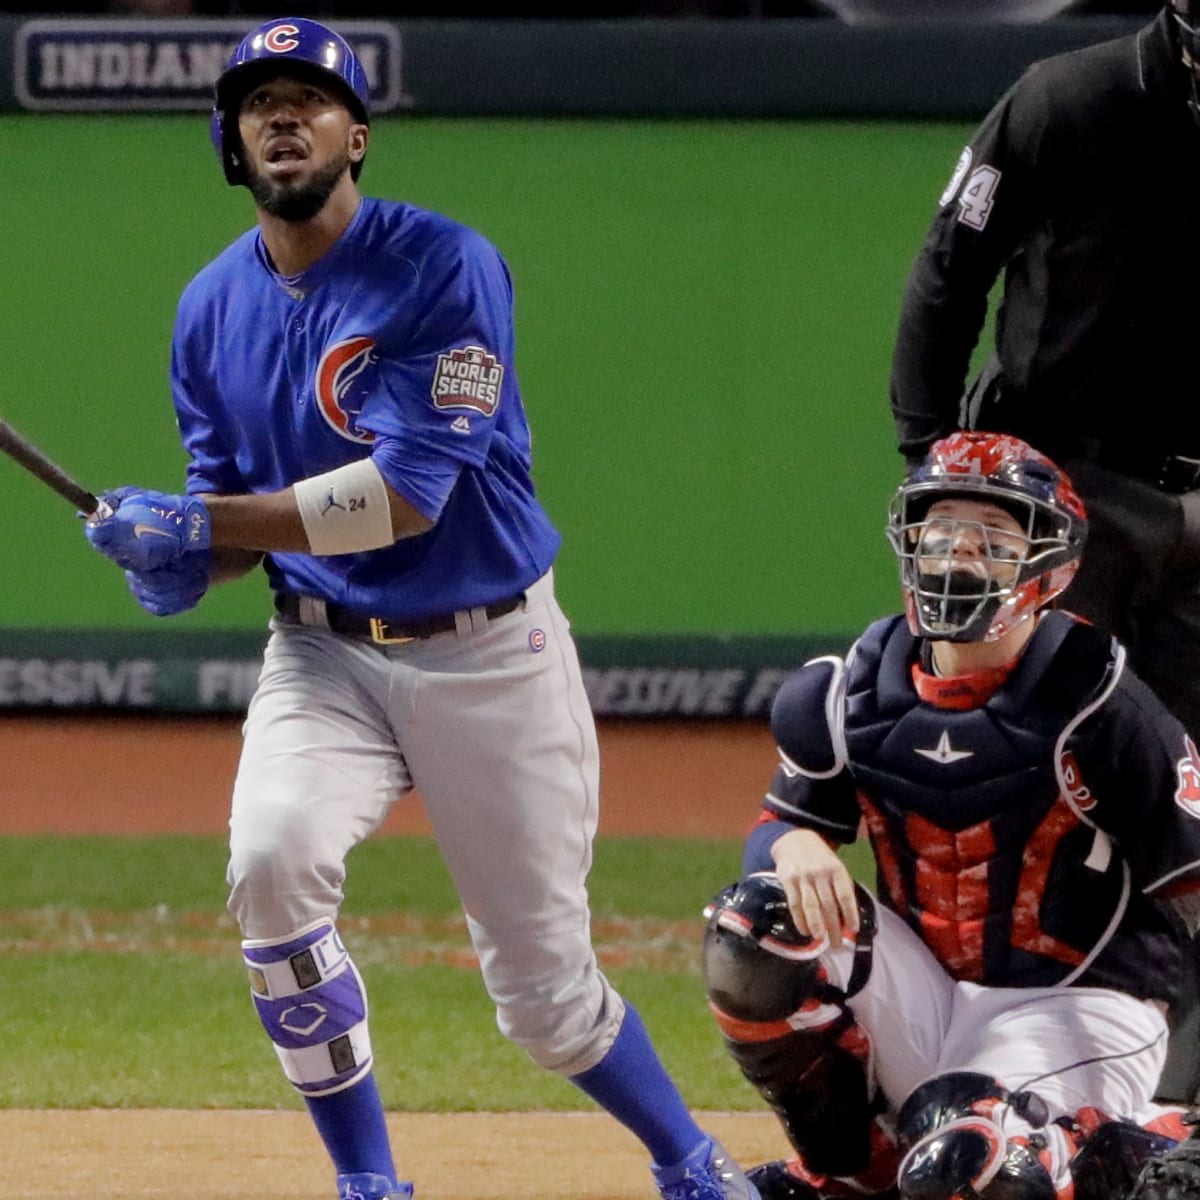 Dexter Fowler opens World Series Game 7 with home run - Sports Illustrated